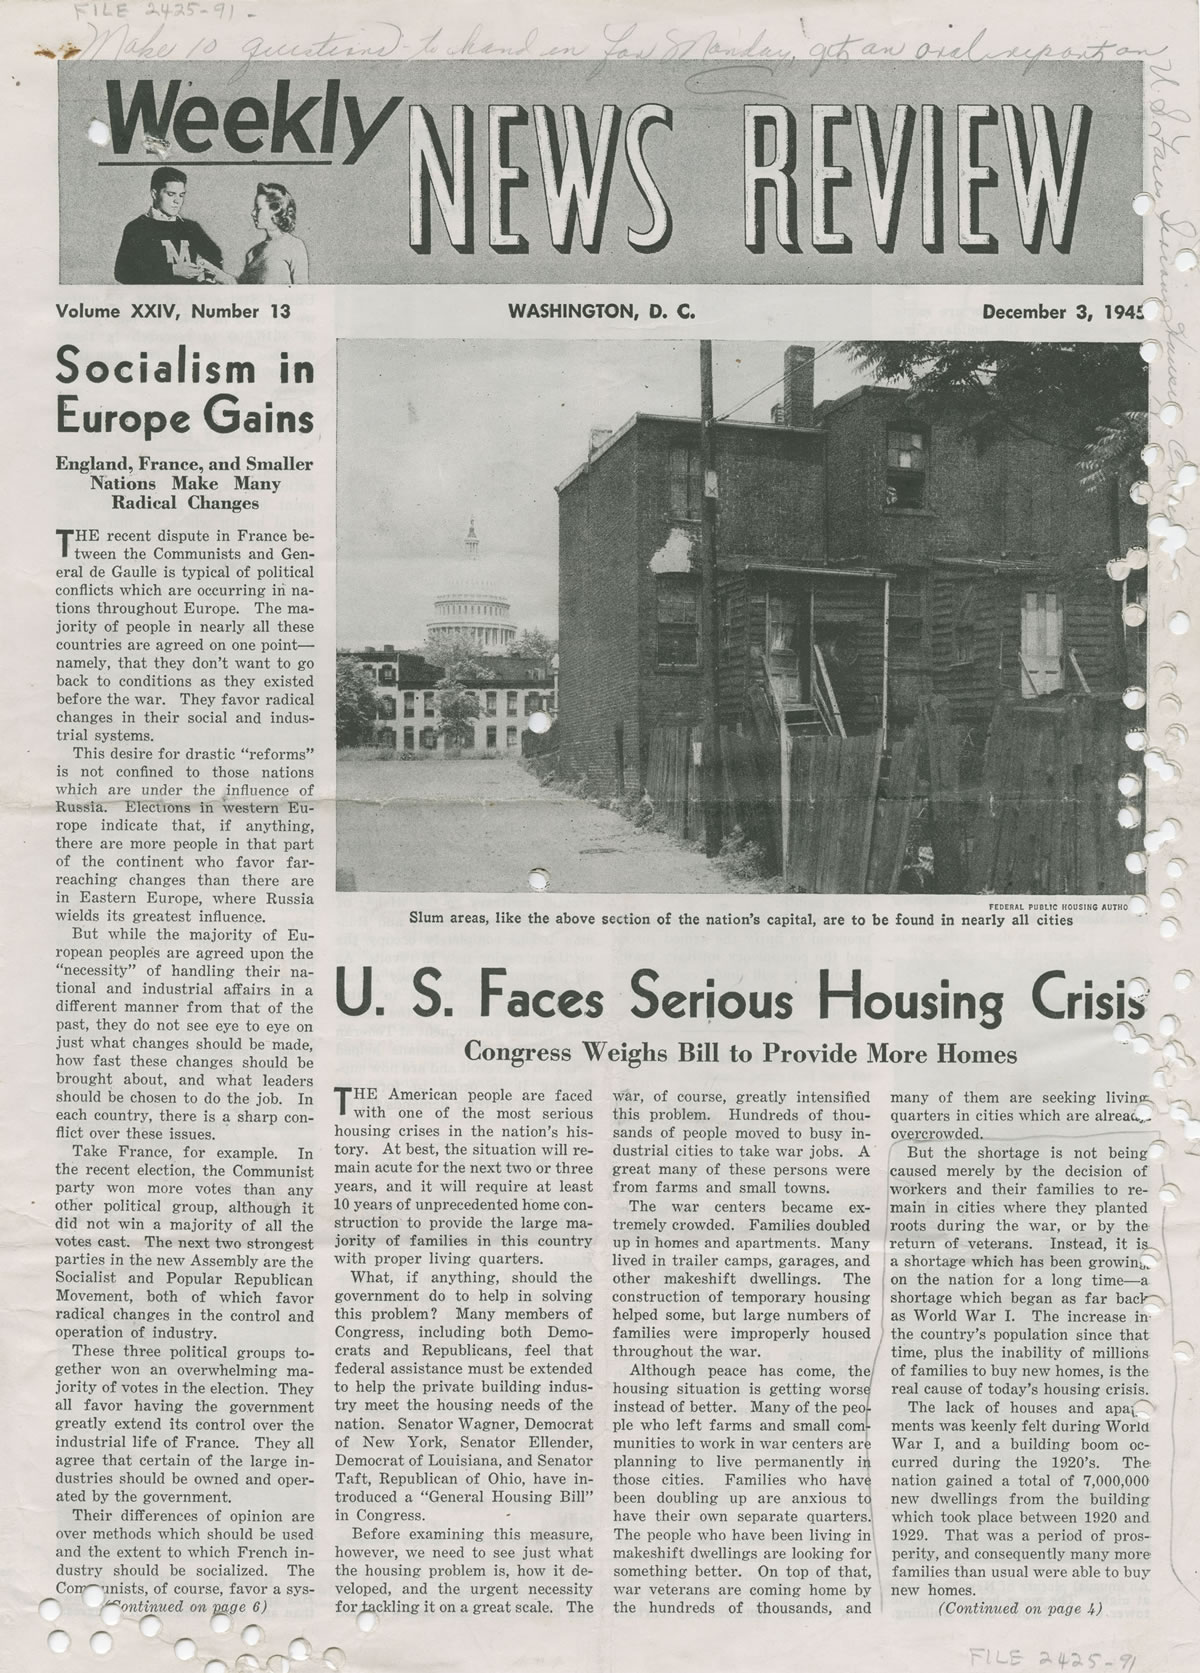 Weekly News Review (pages 1,6), December 3, 1945 